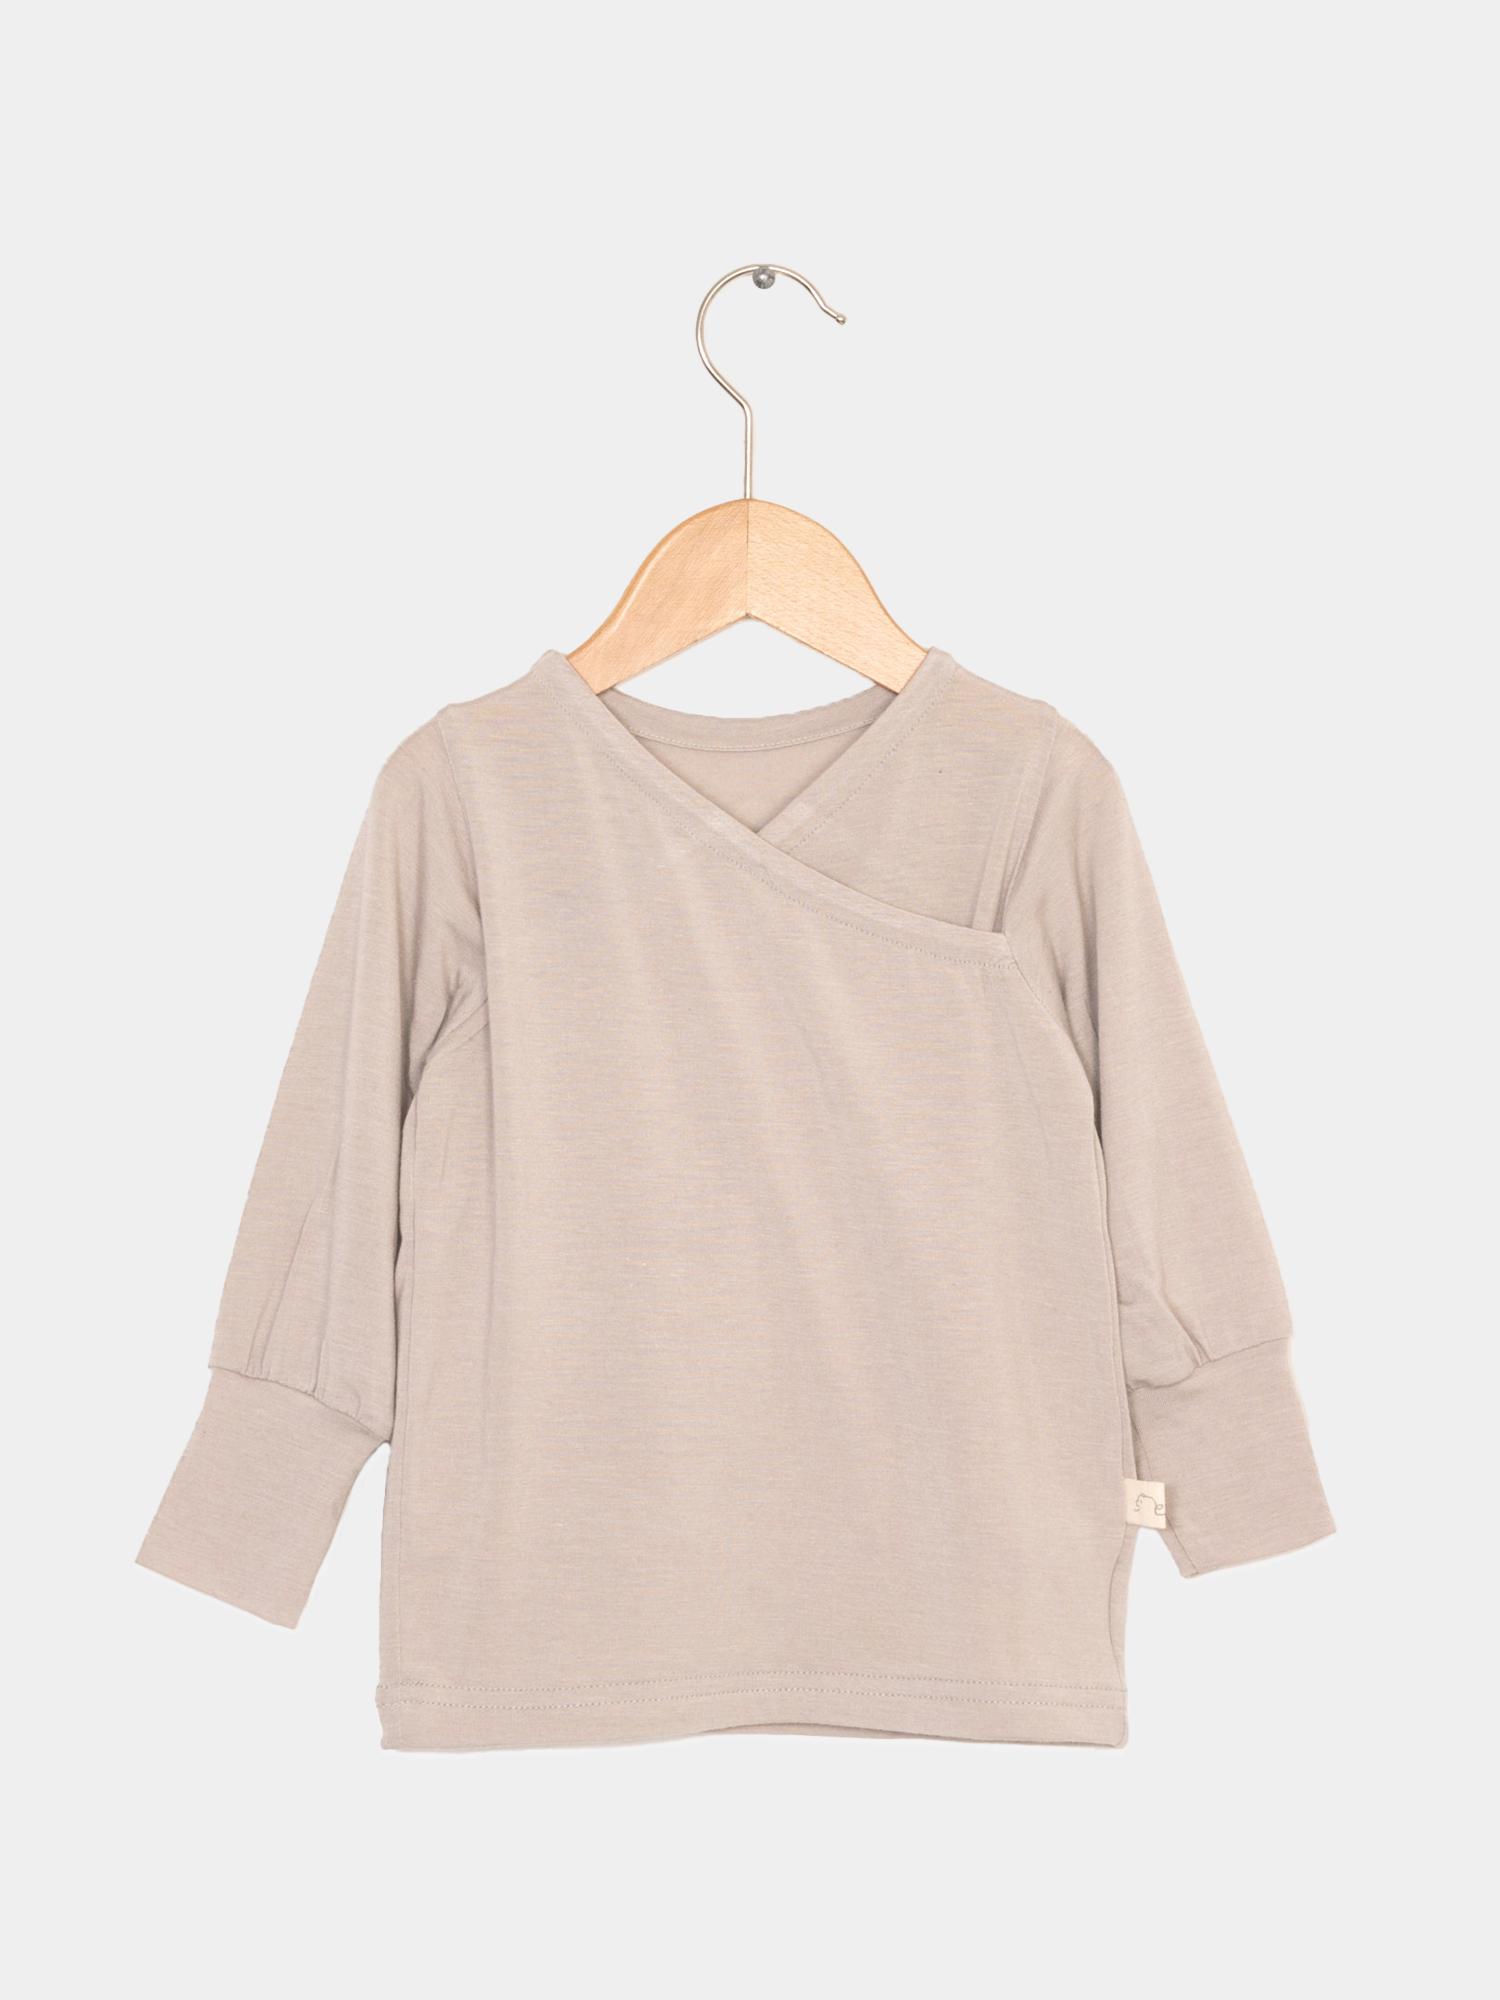 Wrap shirt in cashmere blend - sand